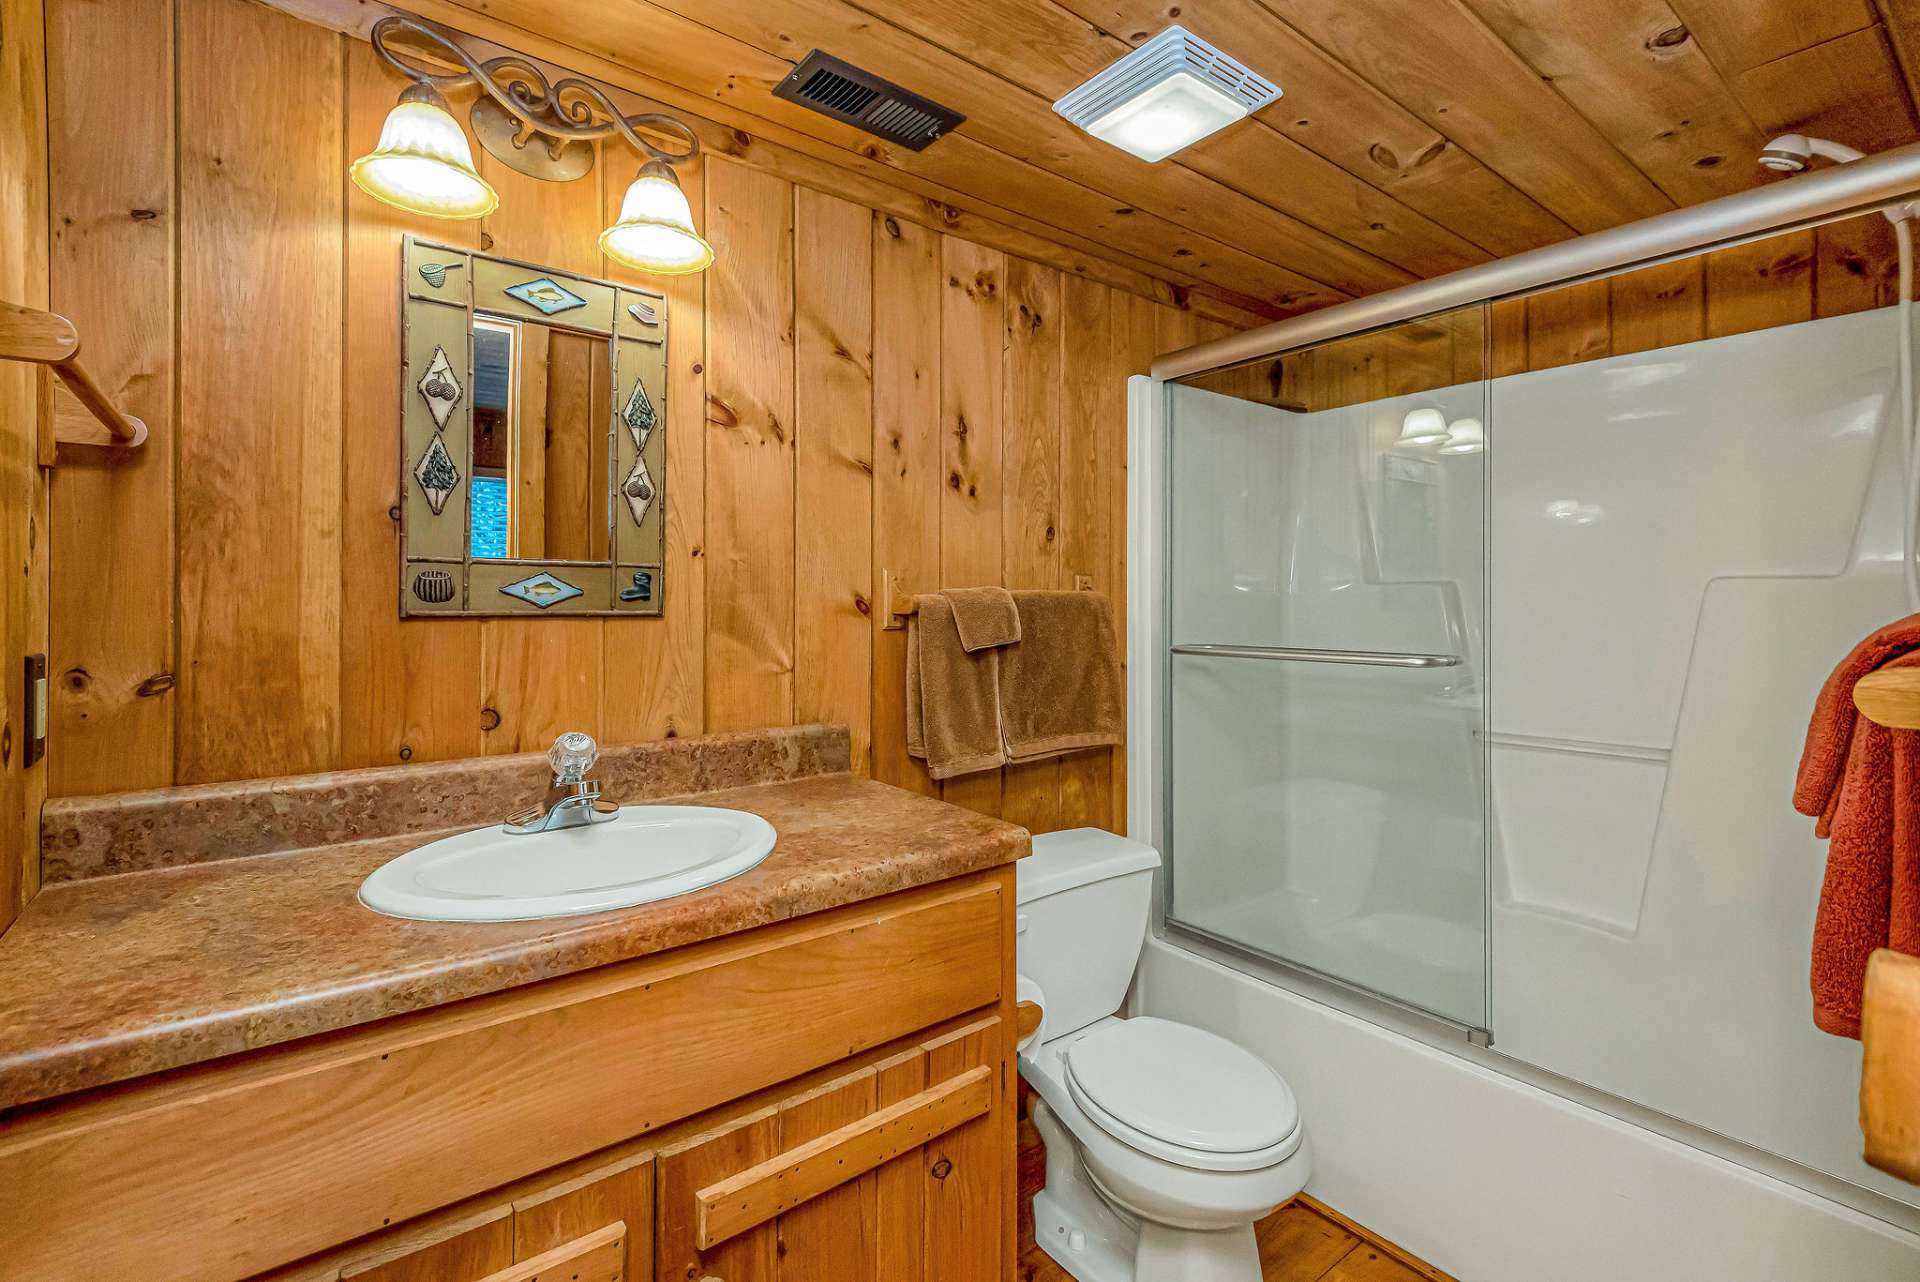 The lower level features a 3rd full bath.